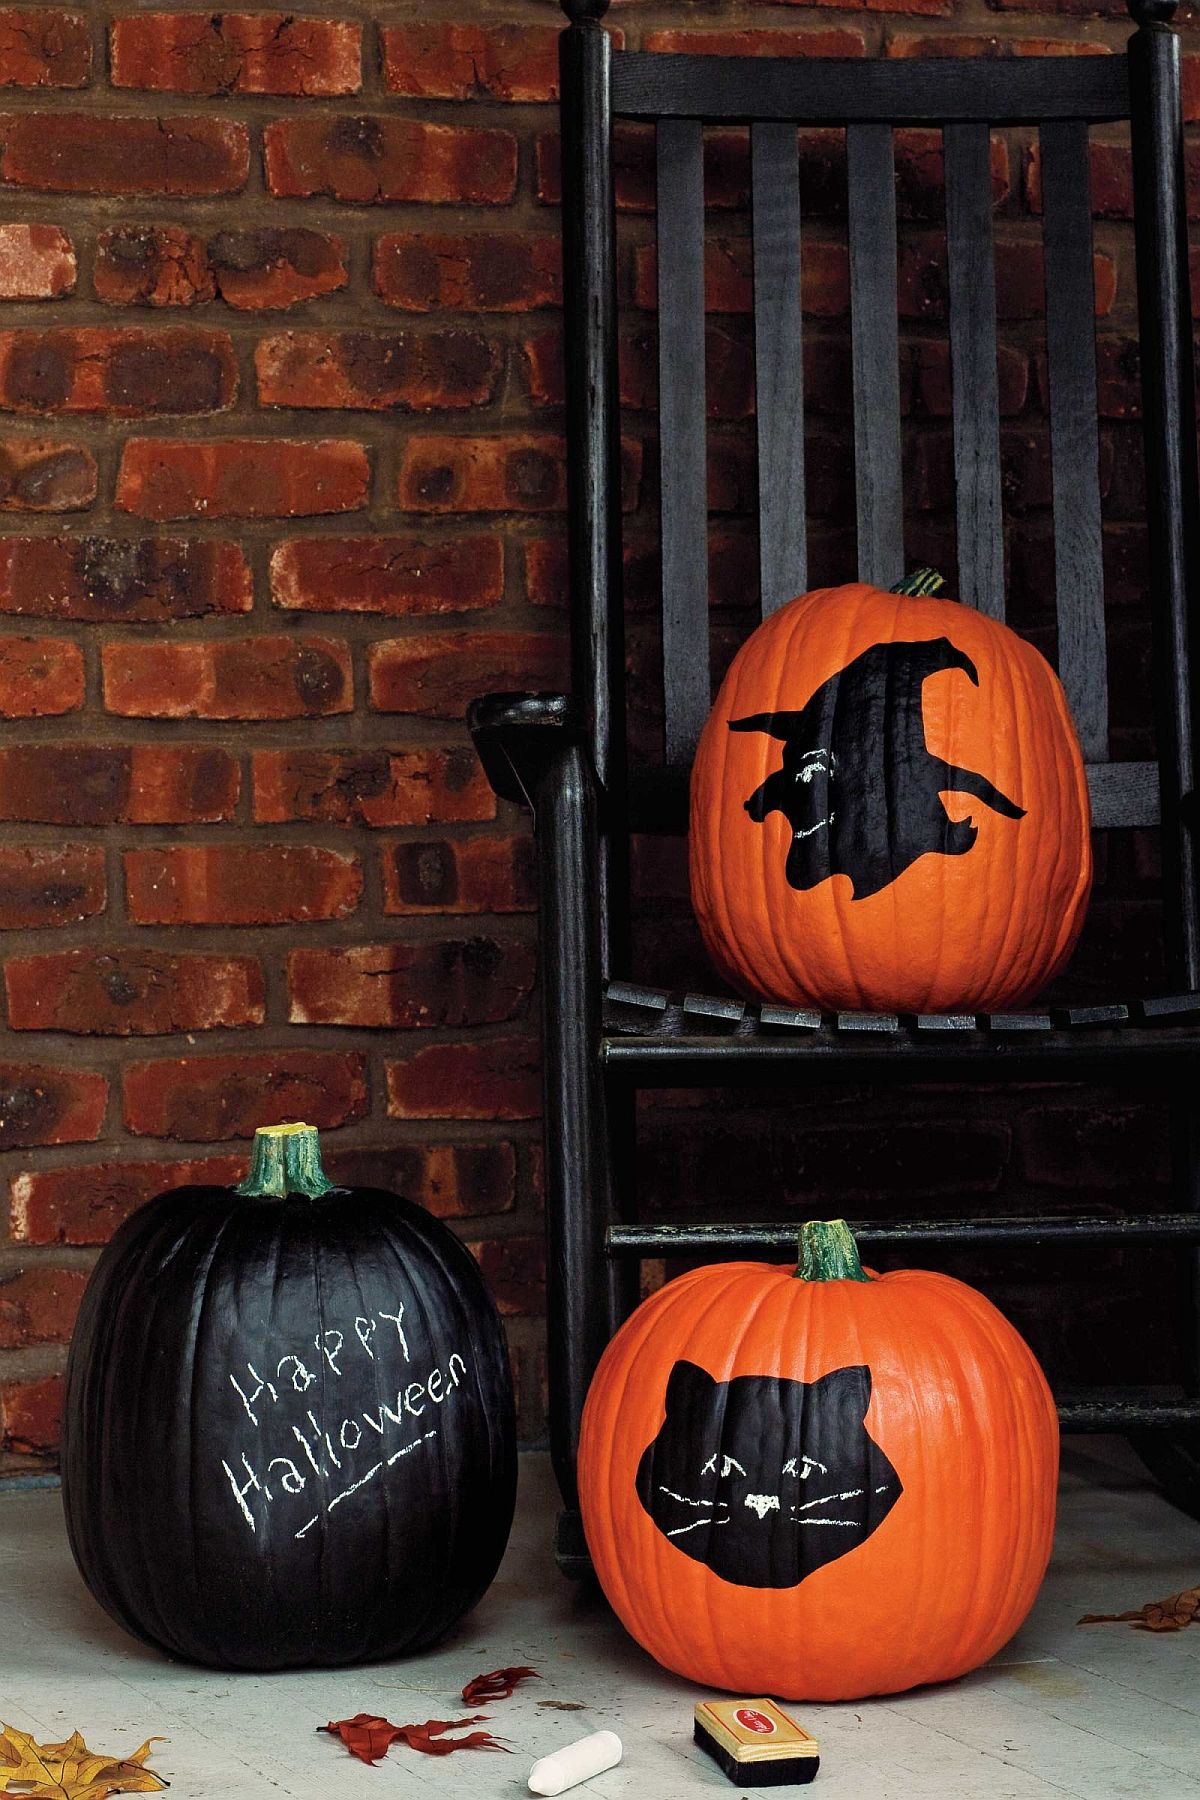 Use chalkboard and paint to create a cool pumpkin clad Halloween porch